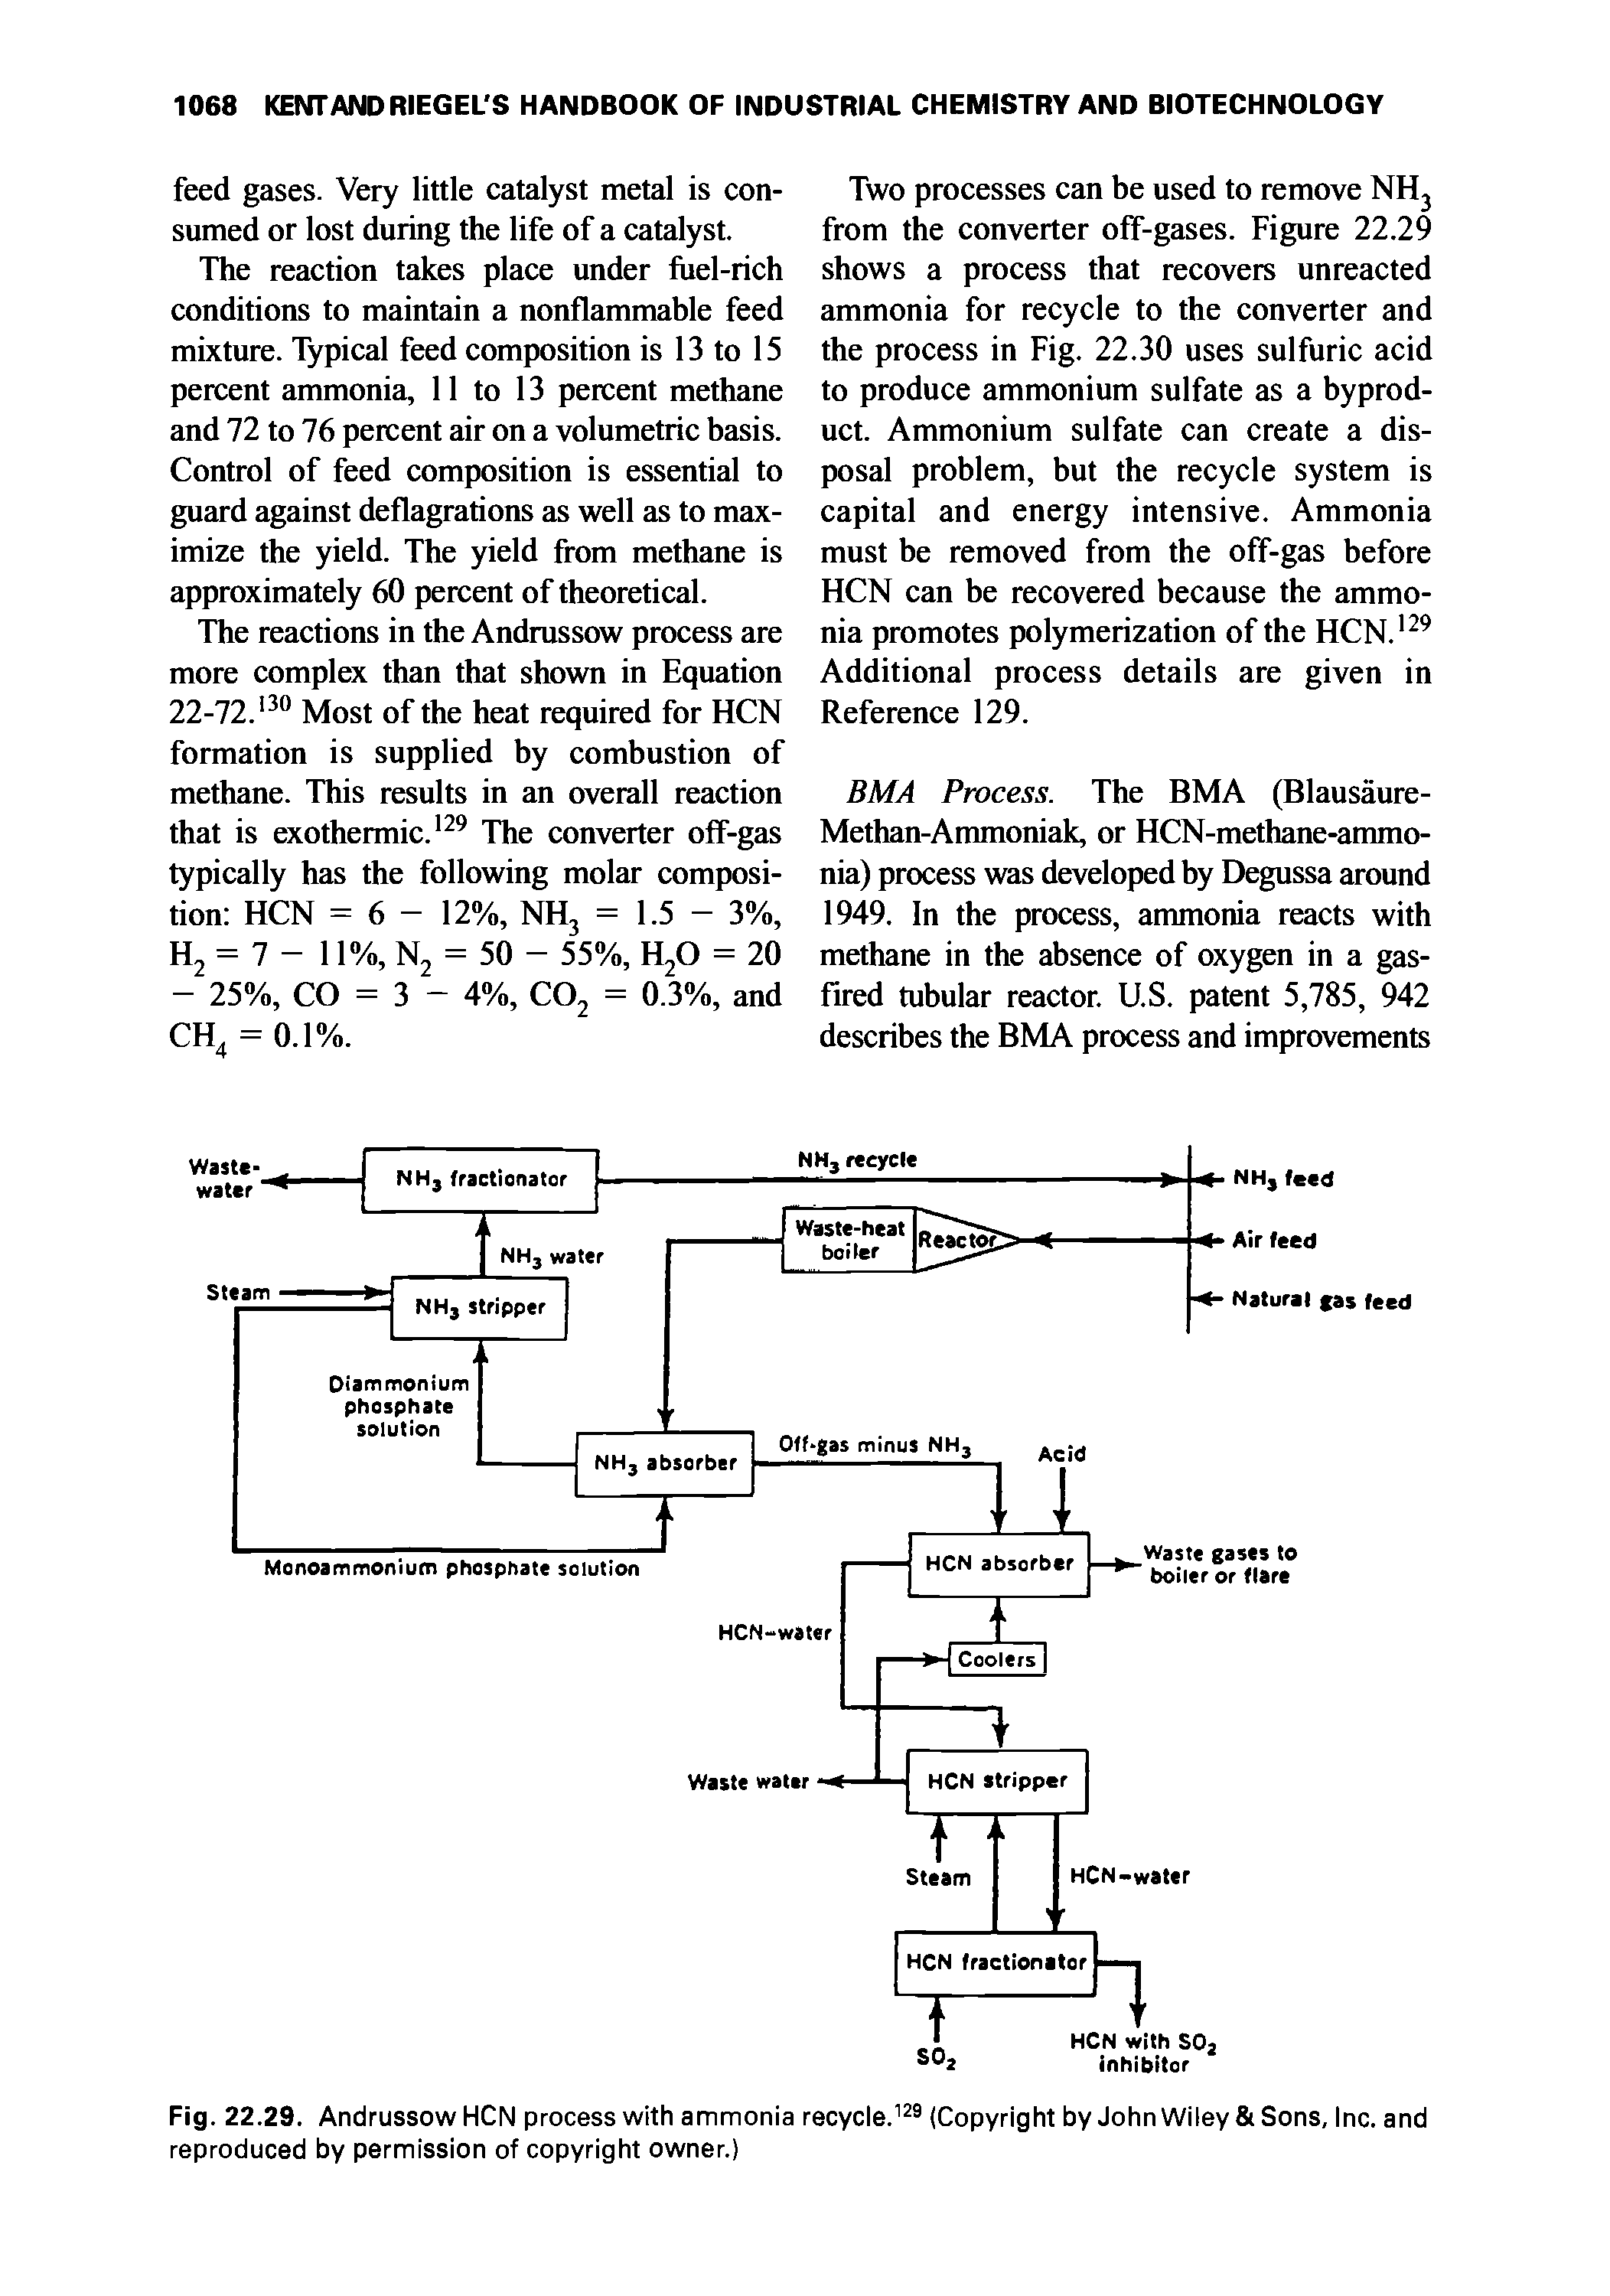 Fig. 22.29. Andrussow HCN process with ammonia recycle.129 (Copyright by John Wiley Sons, Inc. and reproduced by permission of copyright owner.)...